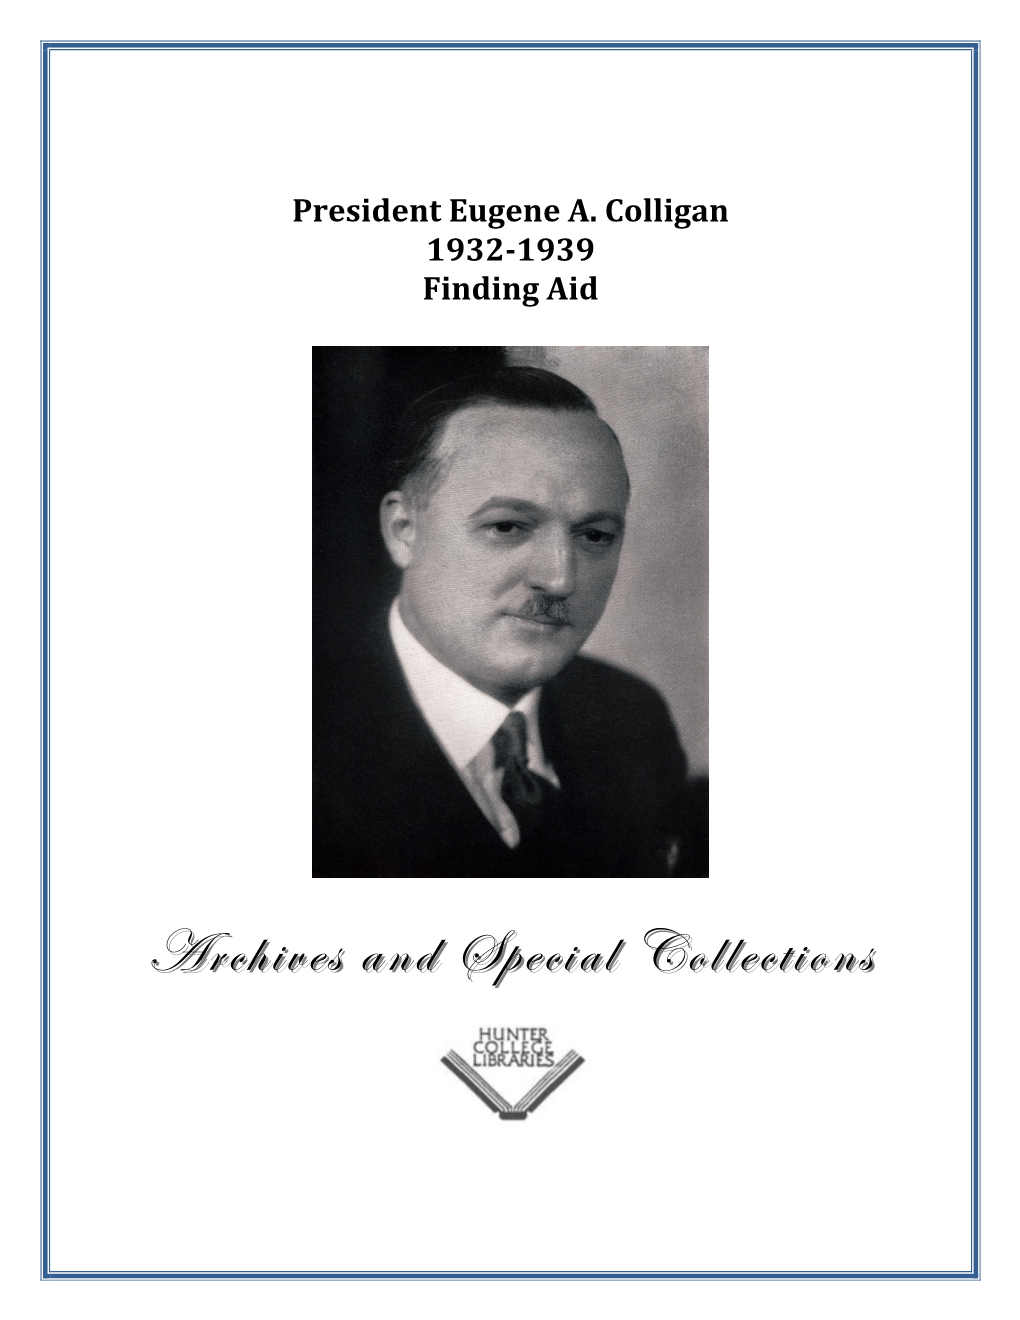 President Eugene A. Colligan Collection, 1932-1939